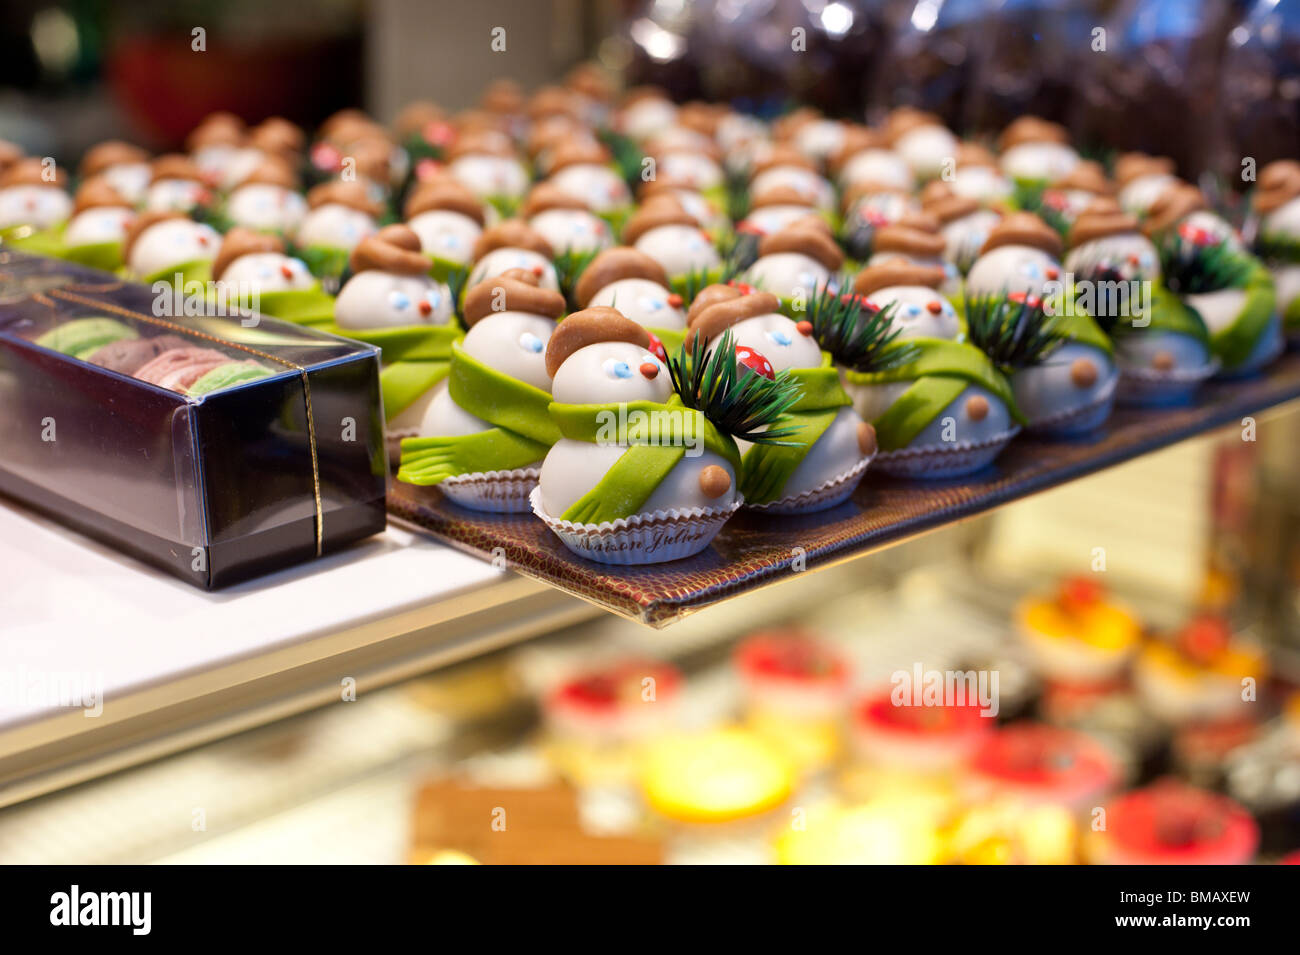 Confections in the shape of snowmen fill a glass display case at a Paris cake shop in December. Stock Photo